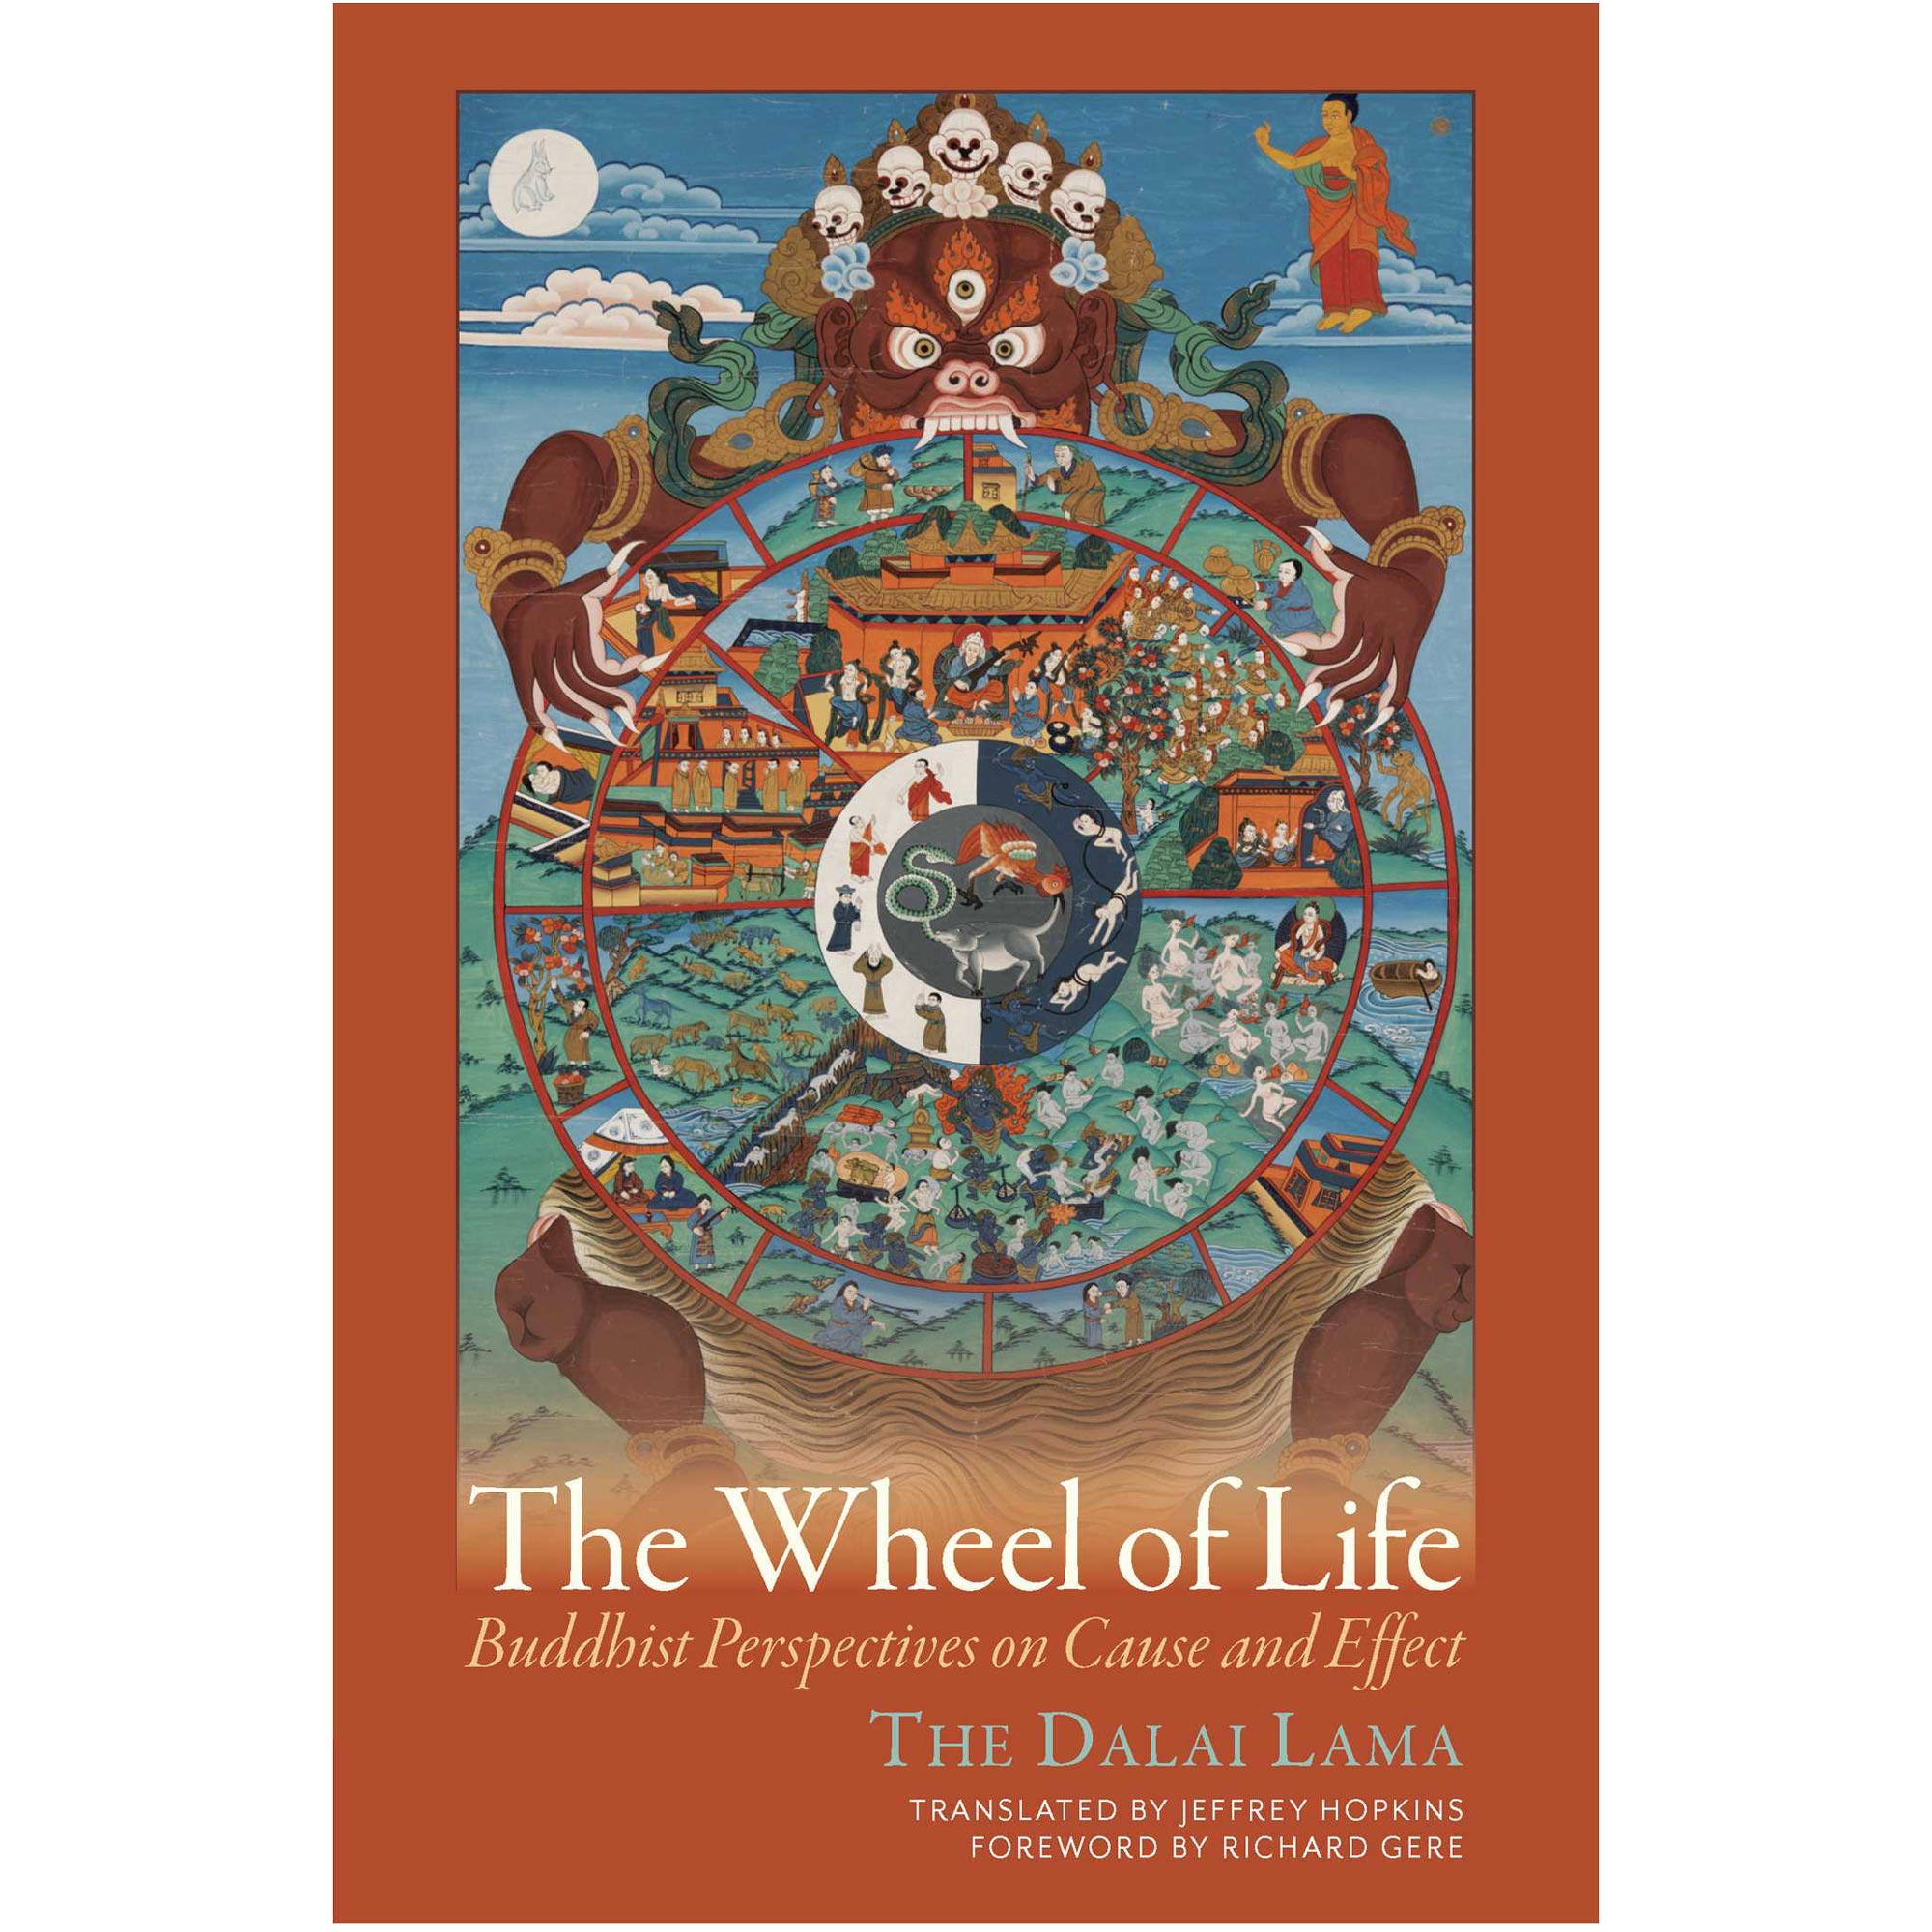 The Wheel of Life: Buddhist Perspective on Cause and Effect